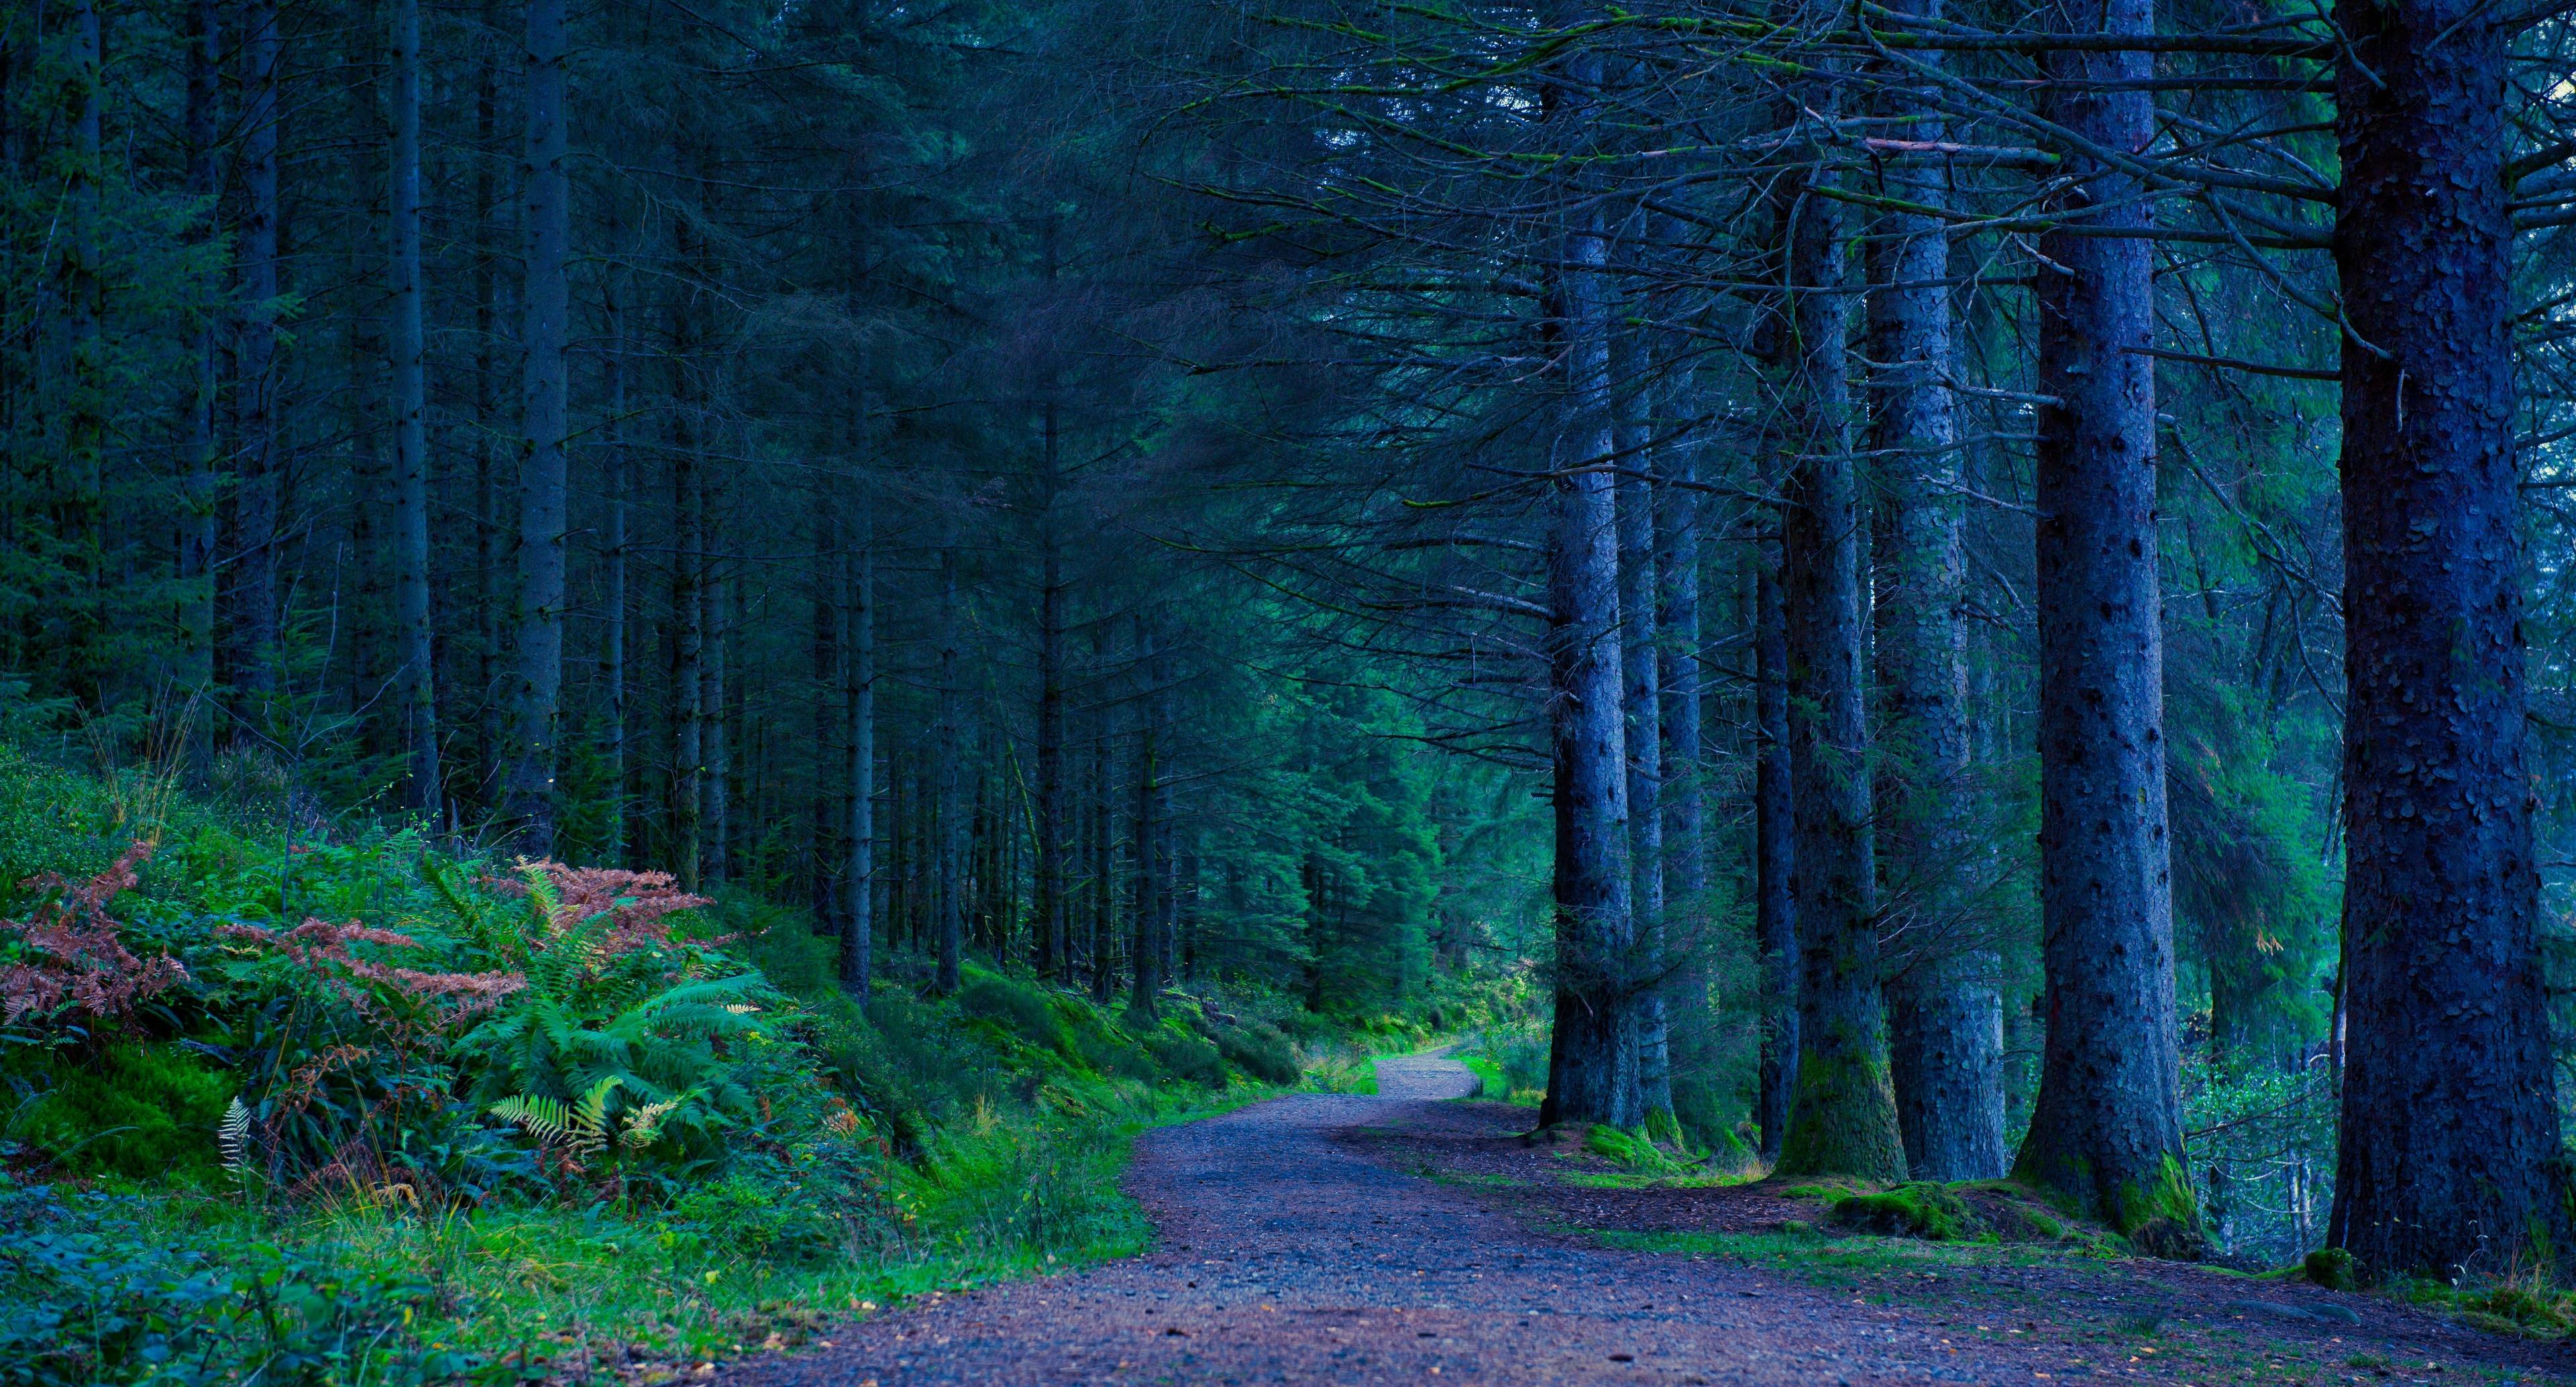 Gorge Walks and Fairy Forests in the Trossachs